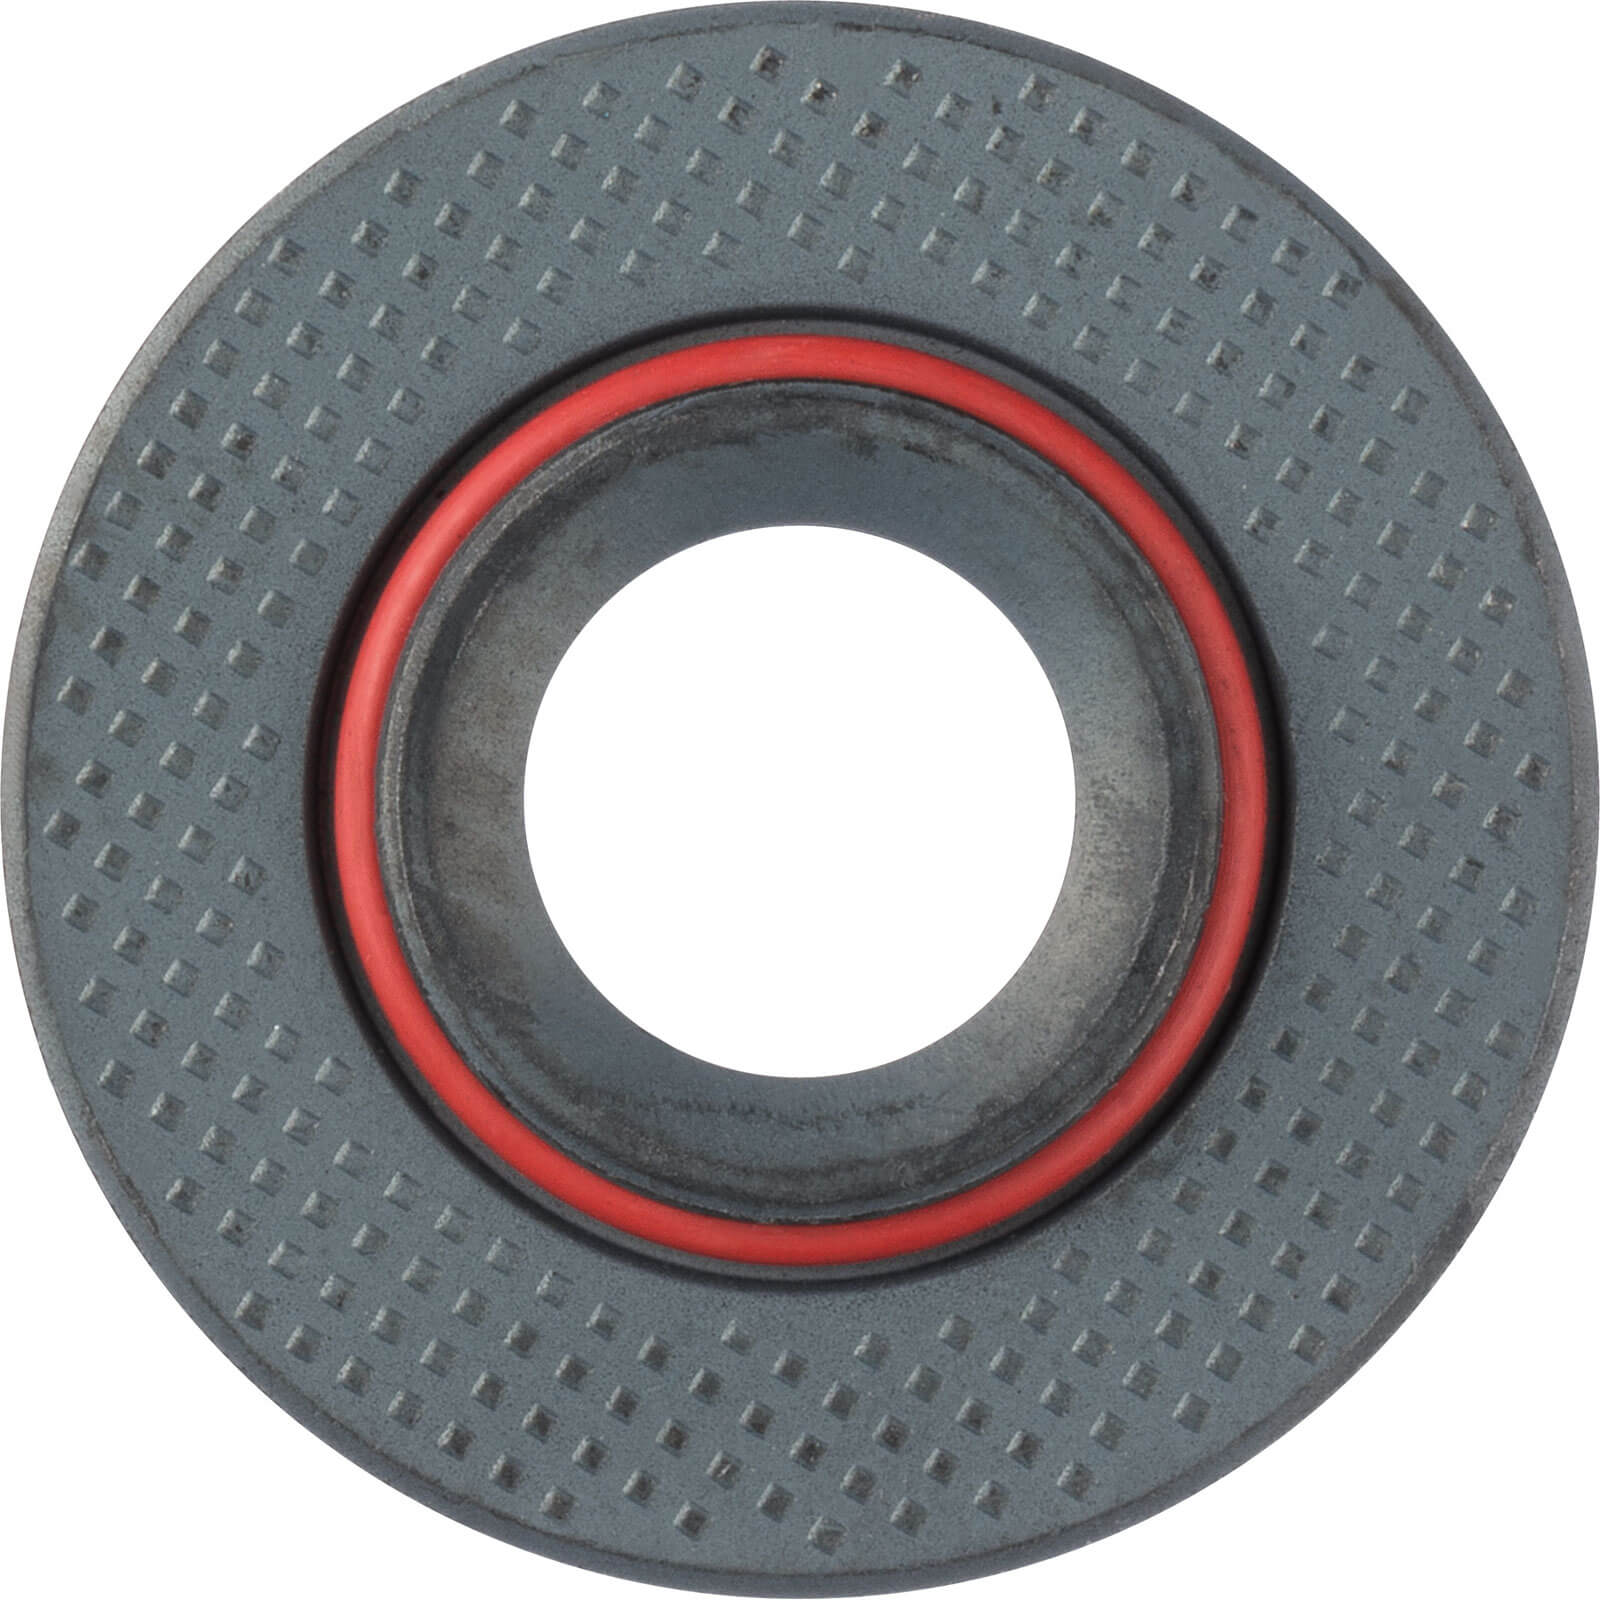 Photos - Power Tool Accessory Bosch Backing flange Nut for 115 - 230mm Angle Grinders 1605703099 